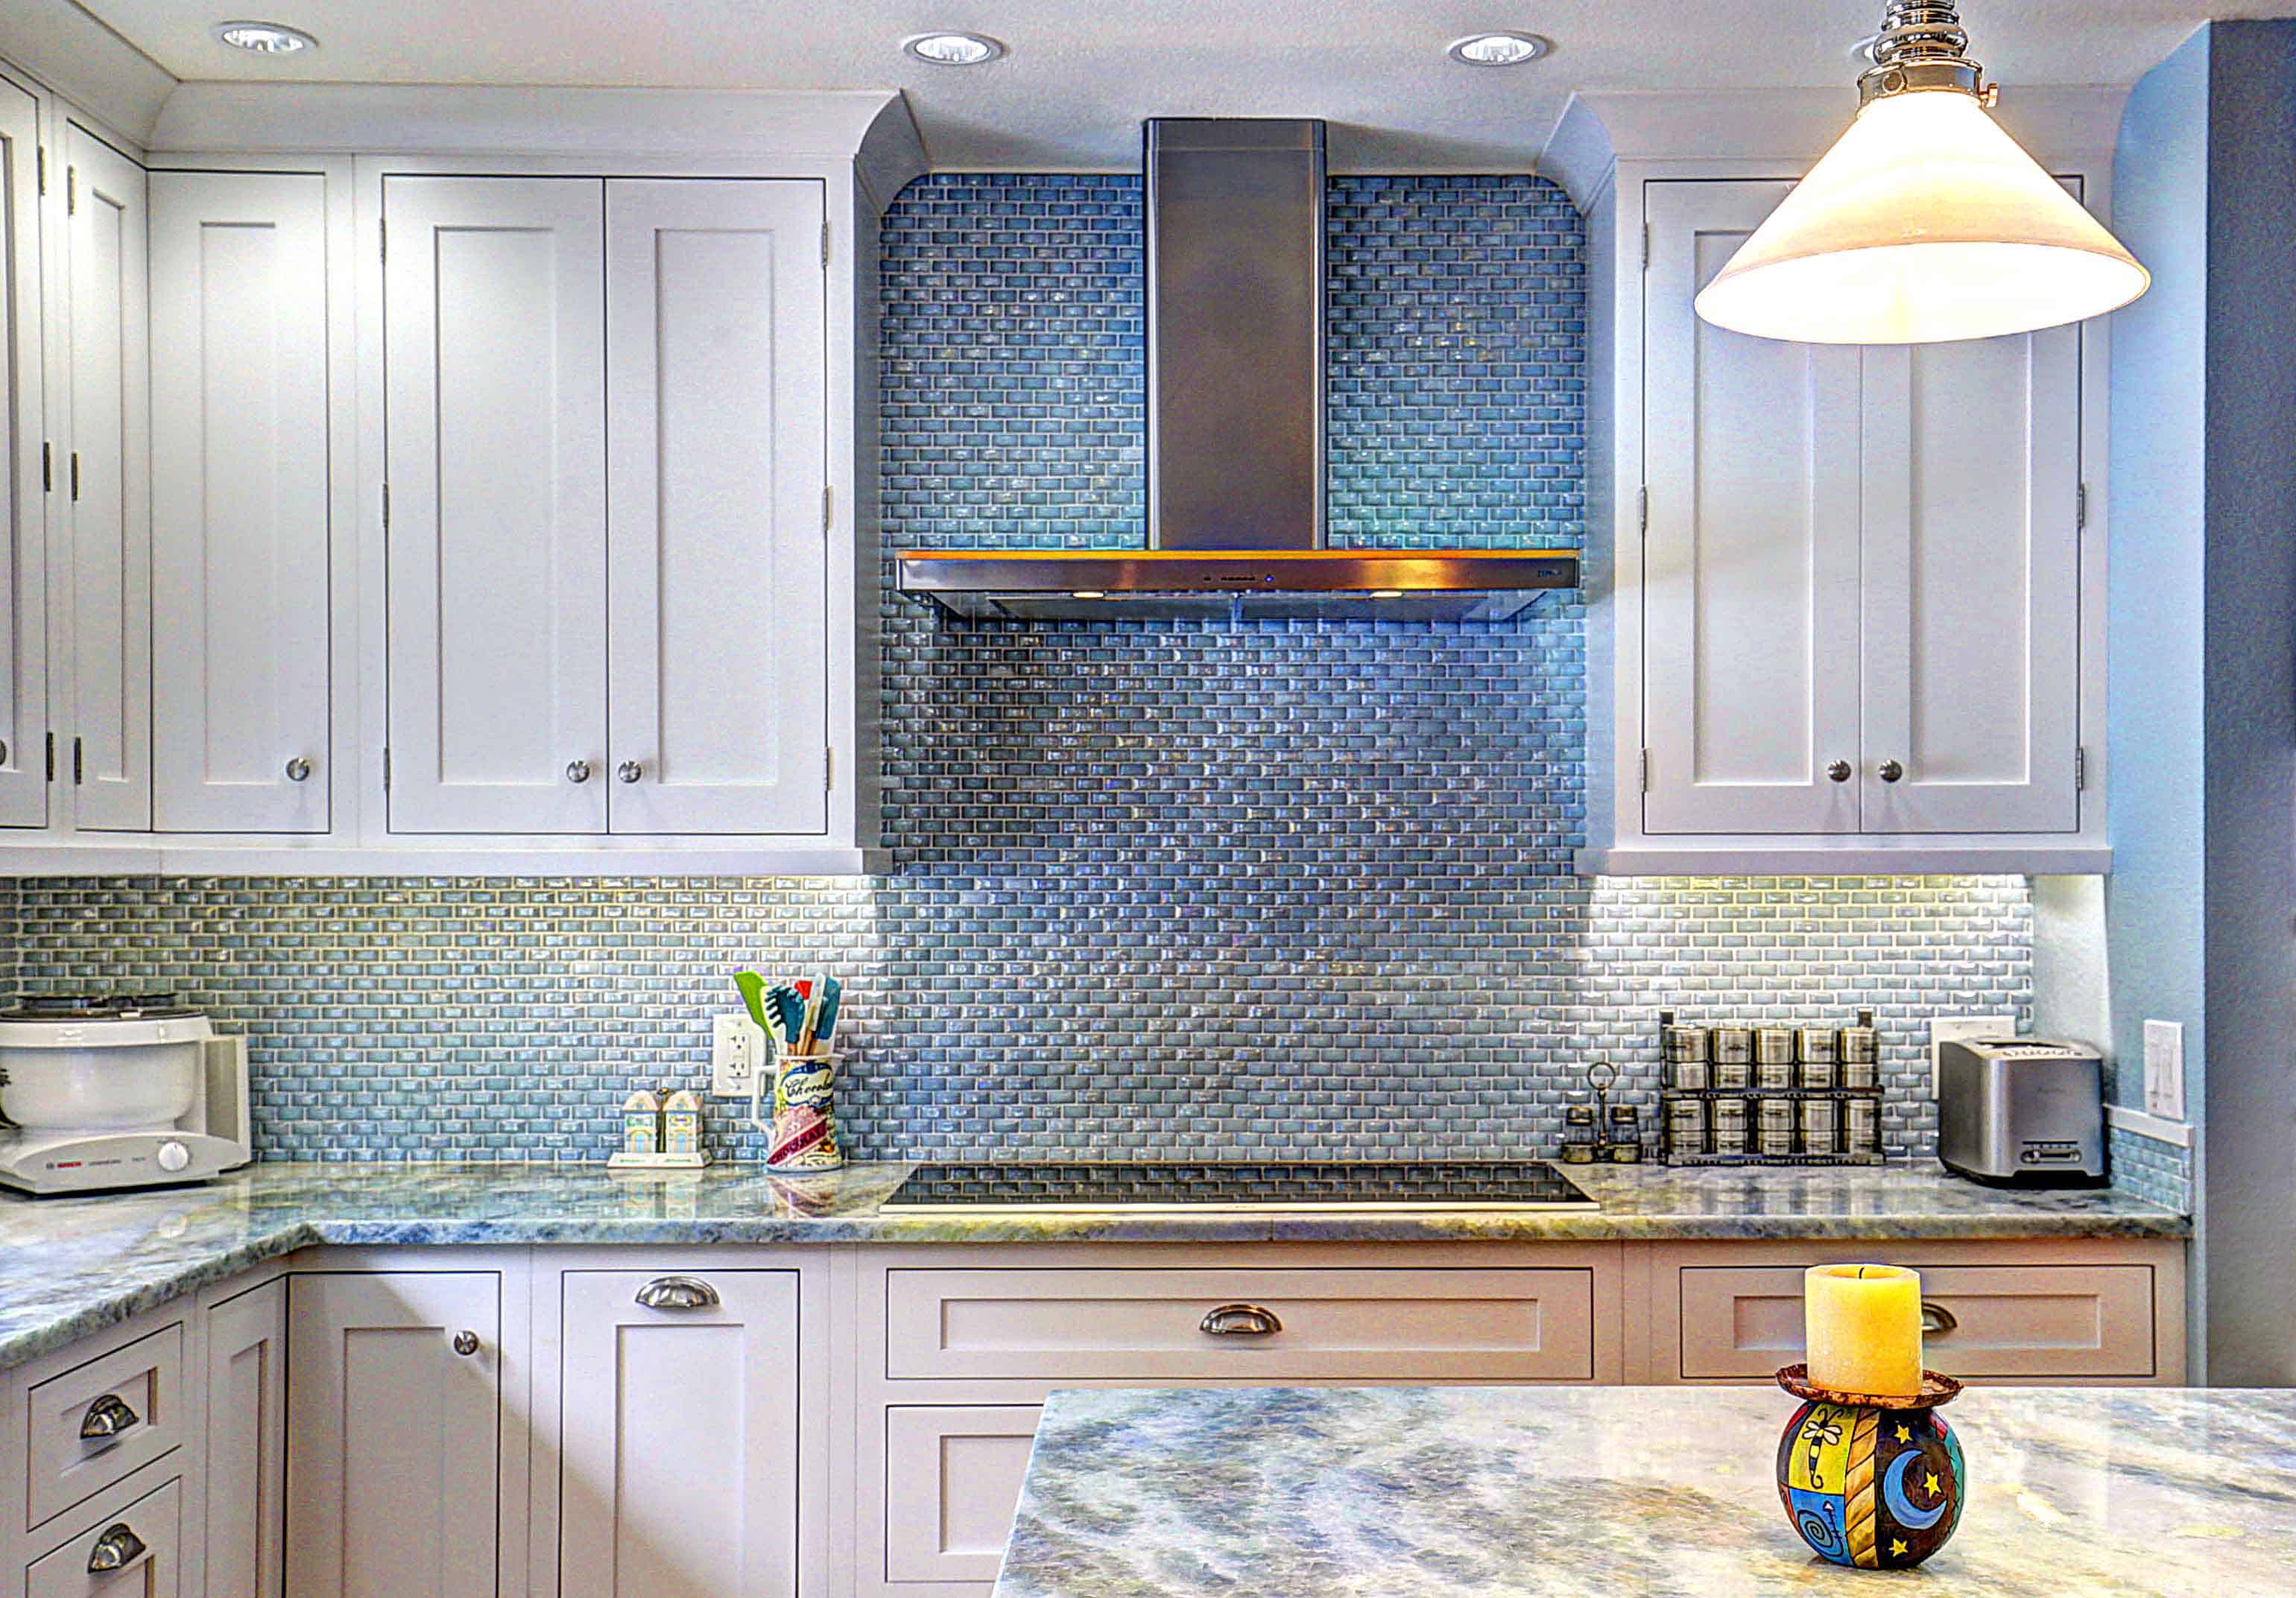 Having a nautical backsplash does not mean you have to have nautical items throughout.